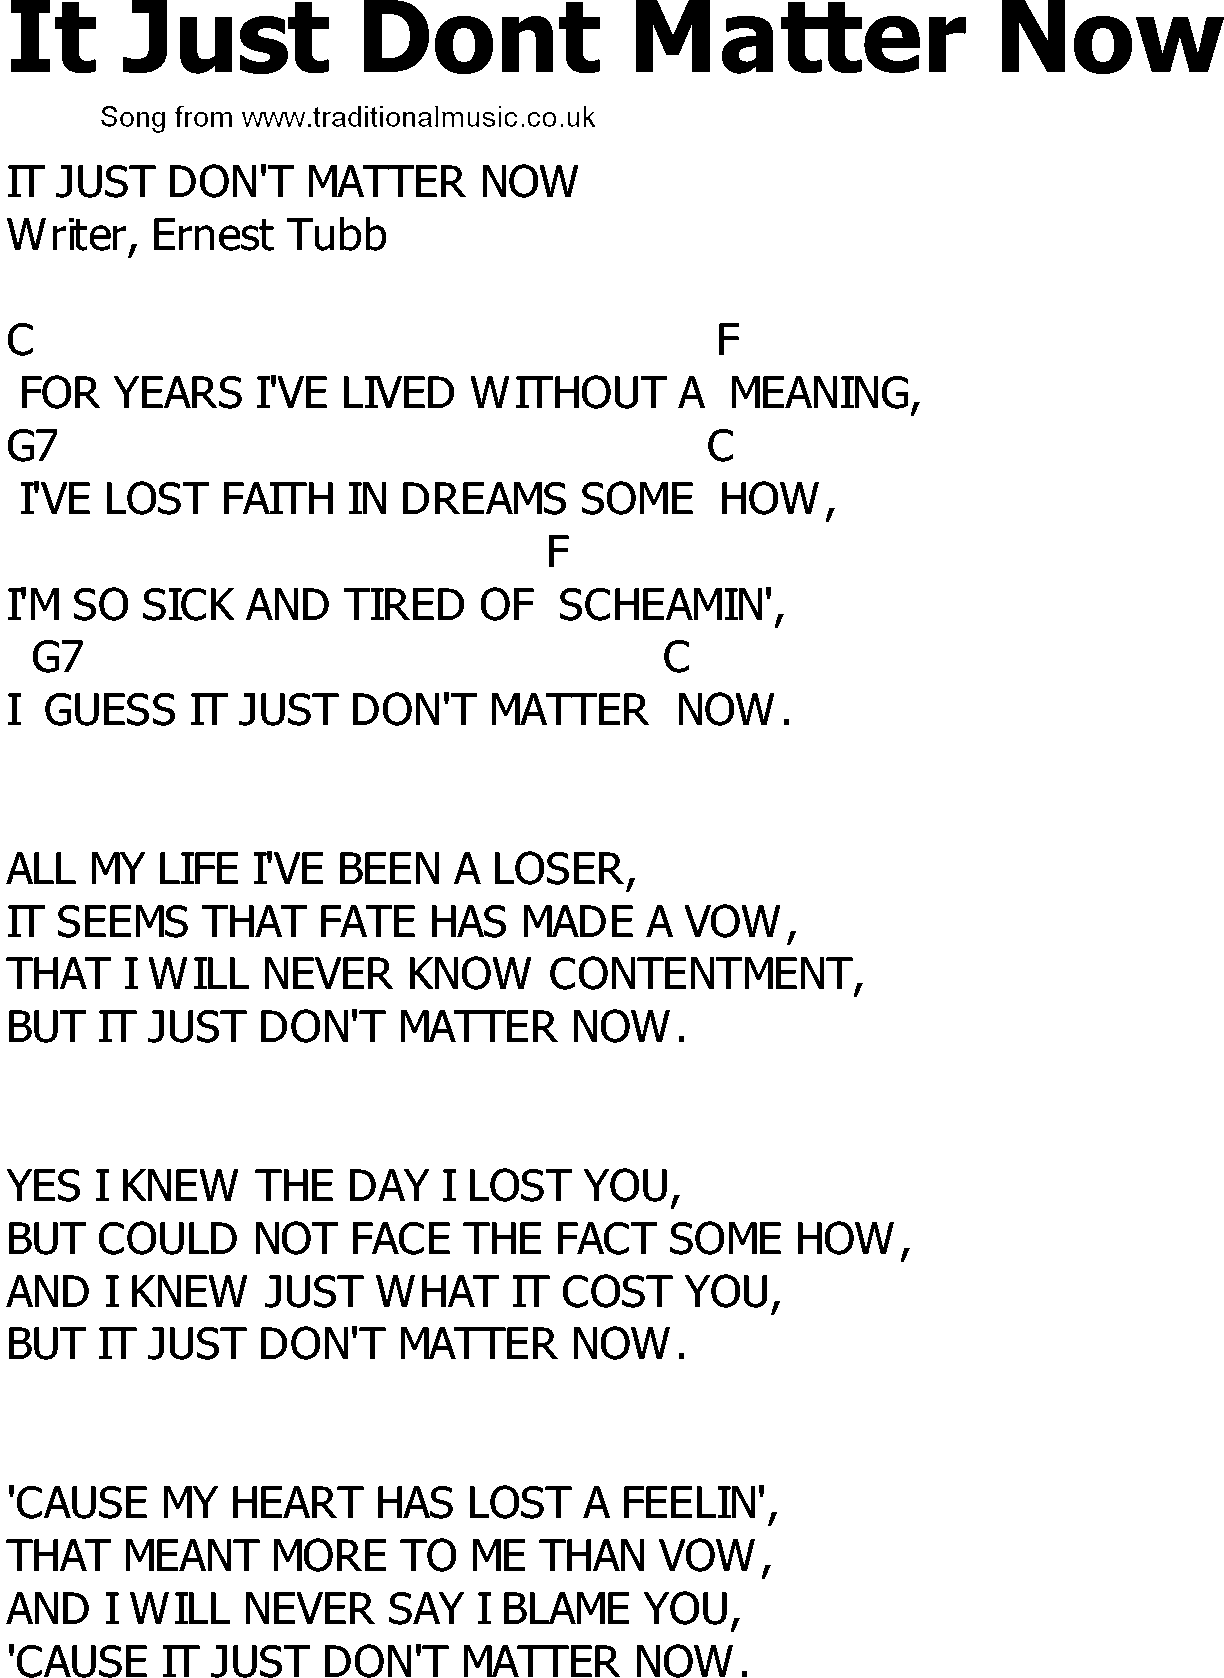 Old Country song lyrics with chords - It Just Dont Matter Now